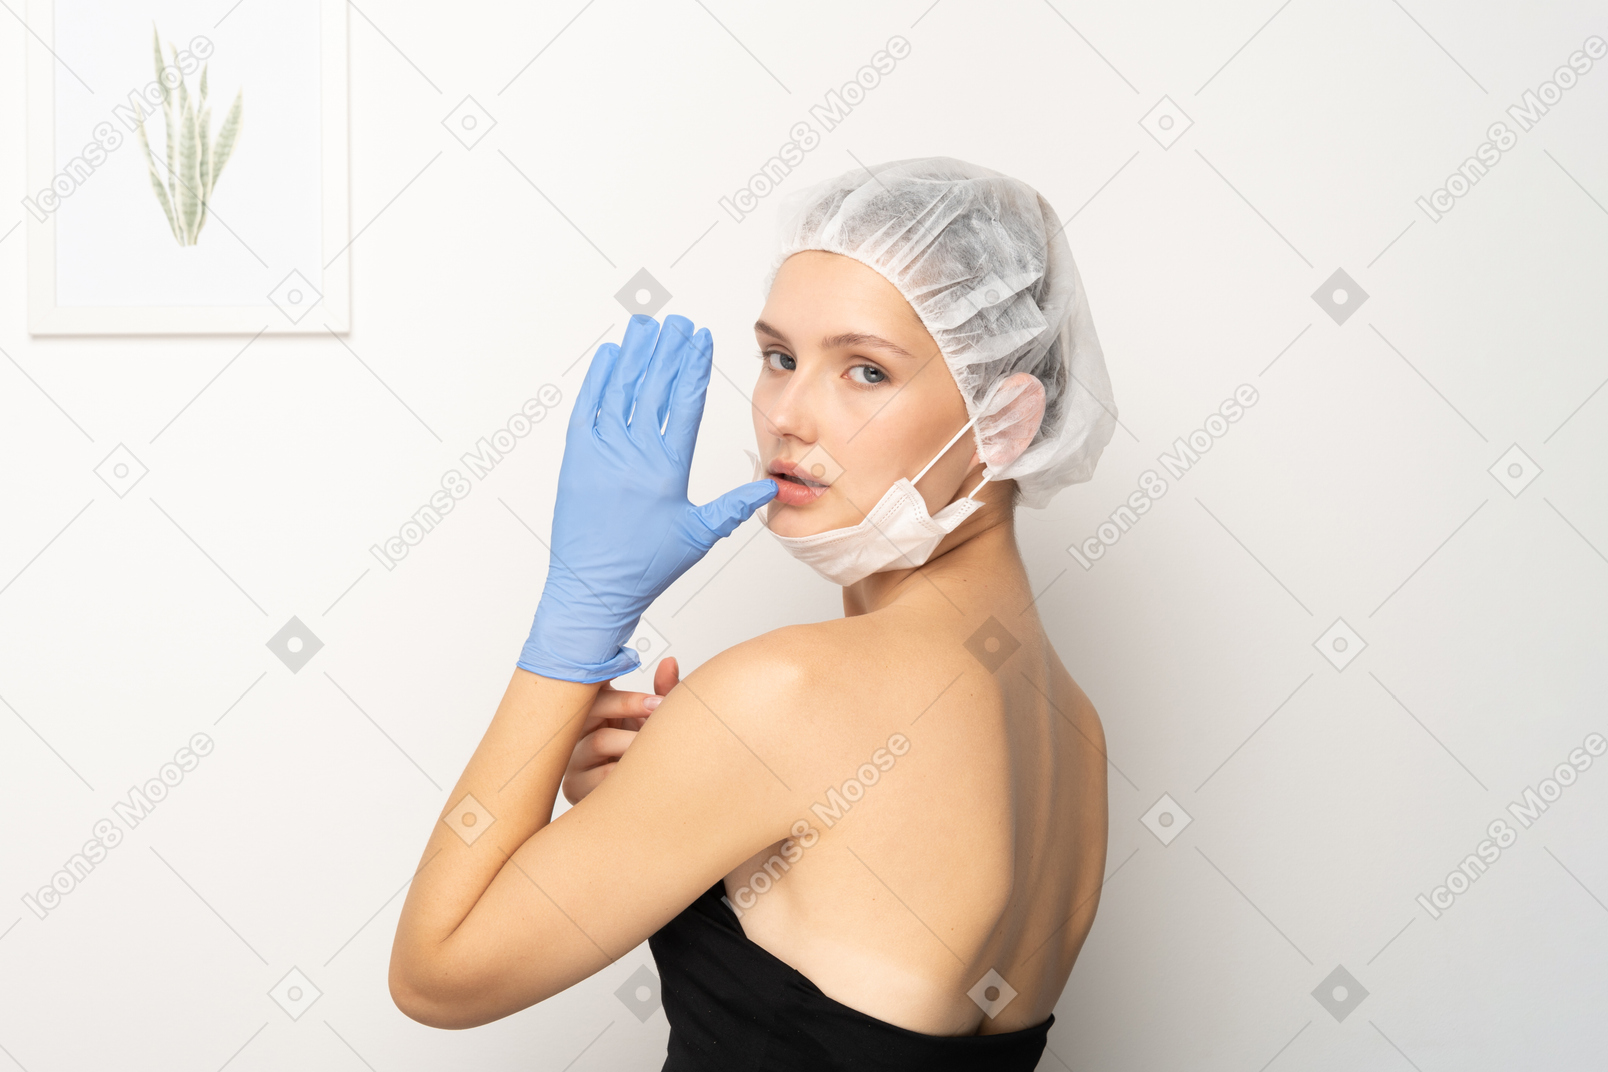 Young woman in surgical cap raising hand